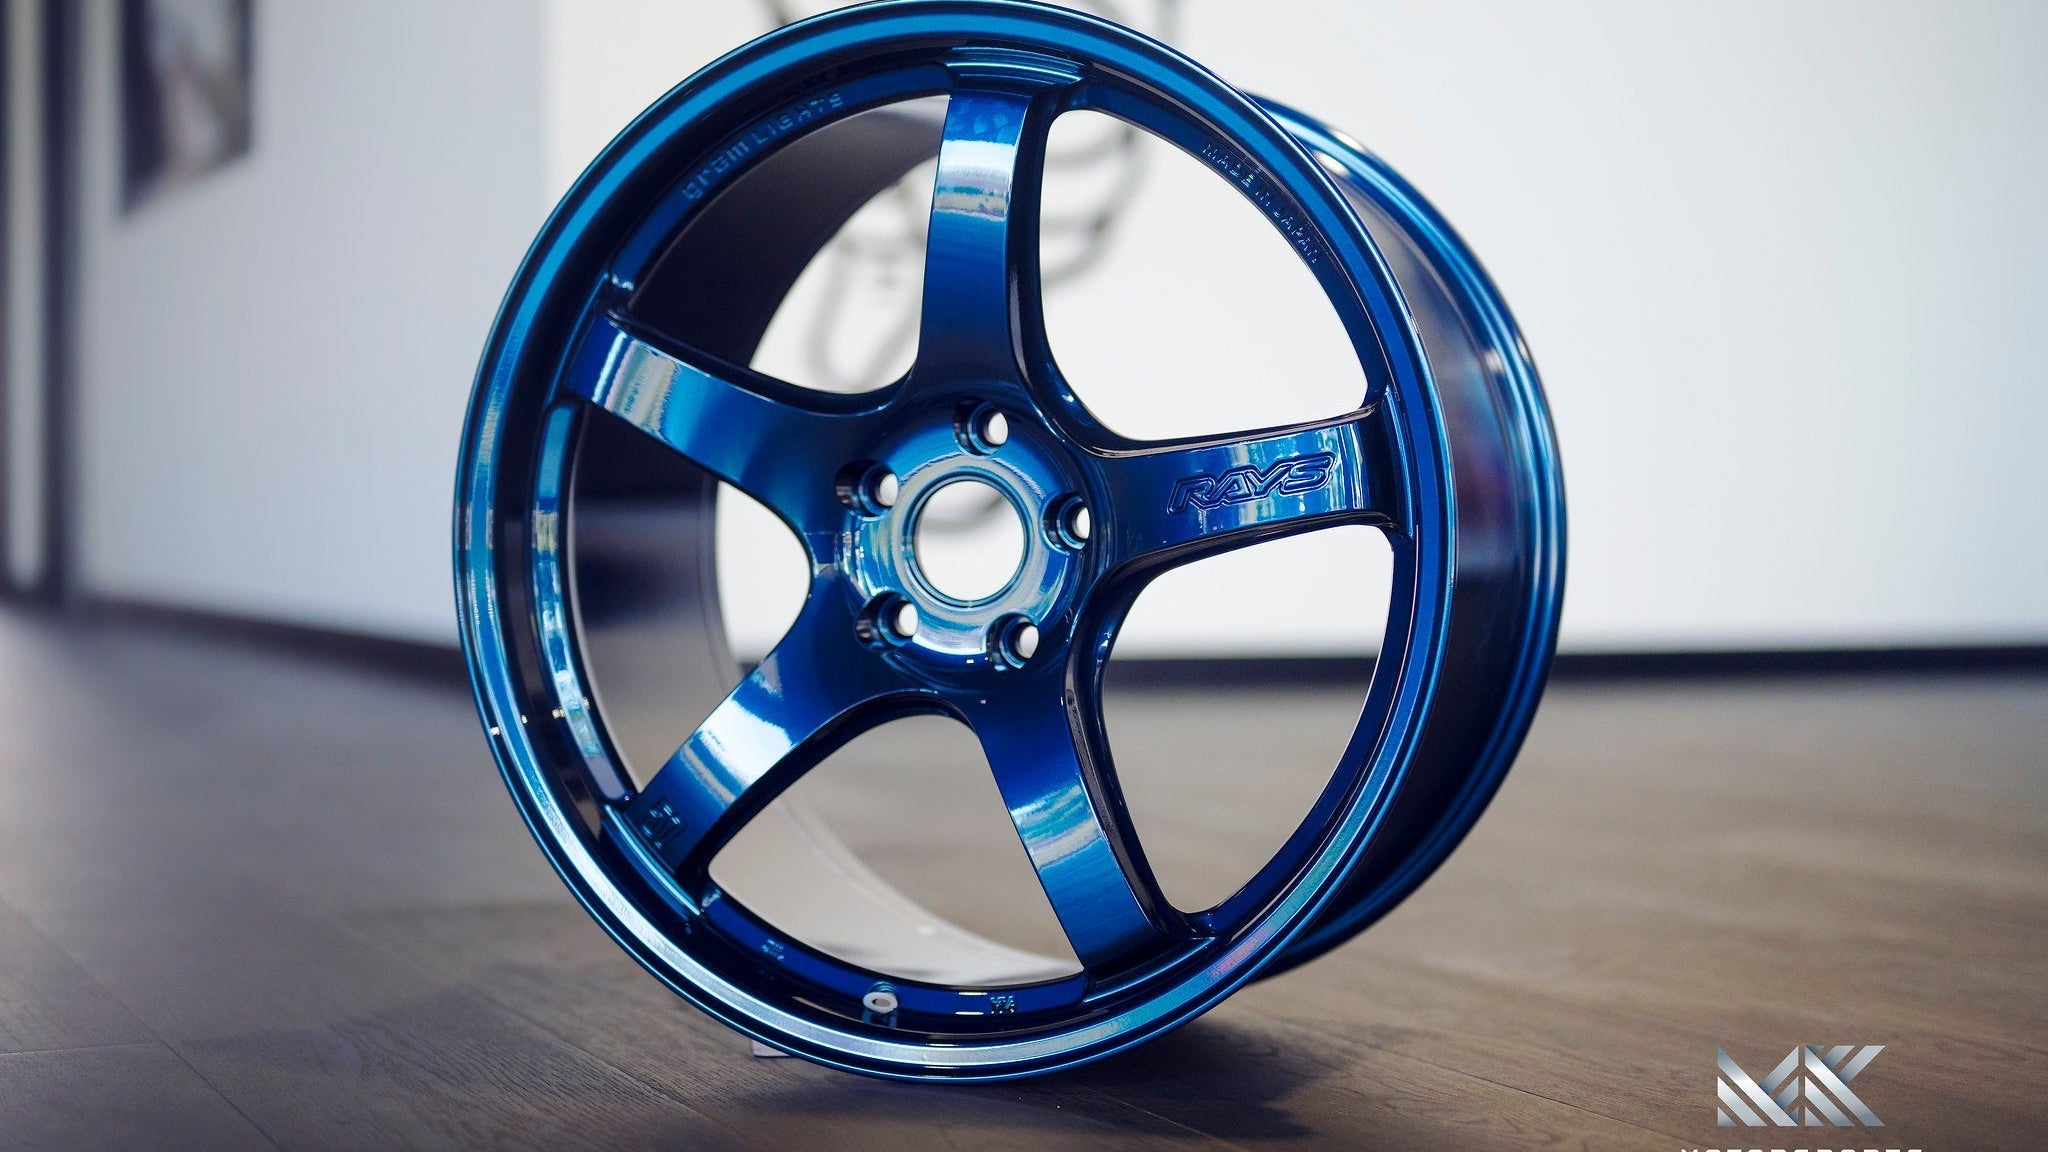 gramLIGHTS 57CR 18" Single Units - Premium Wheels from Gram Lights - From just $623.0! Shop now at MK MOTORSPORTS